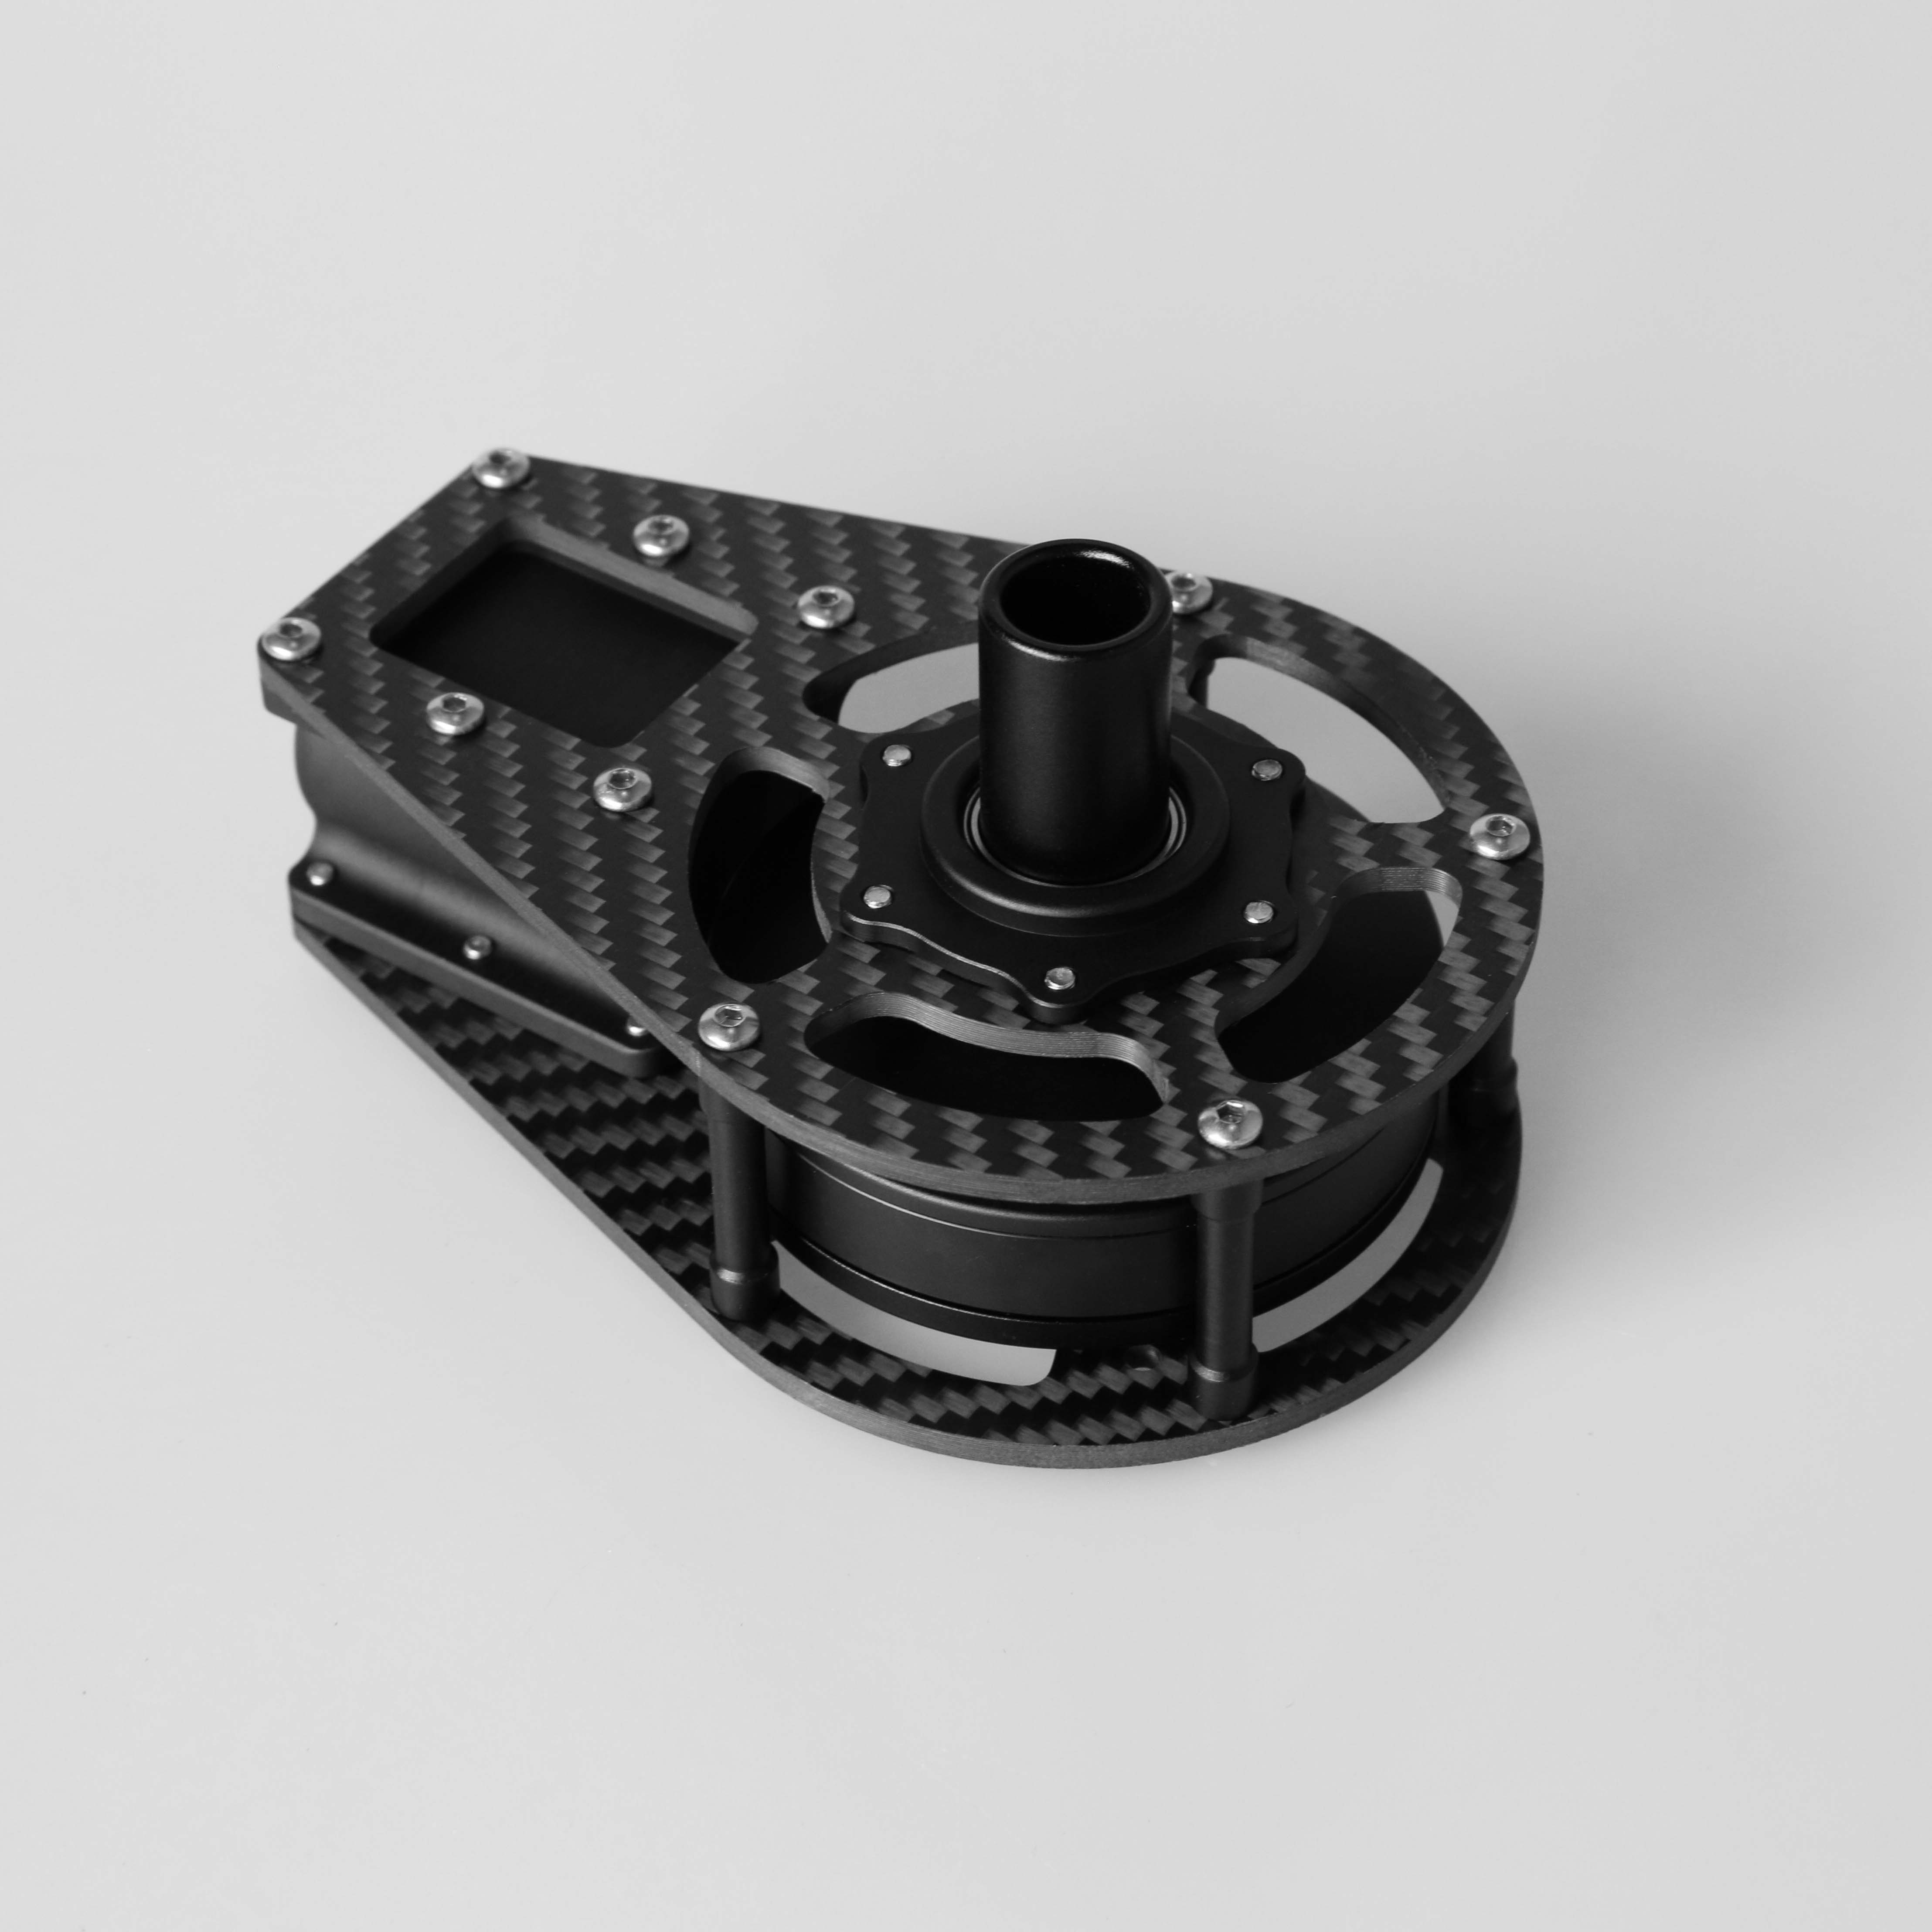 3 axis 6208 tilt ,pitch X axis motor cage